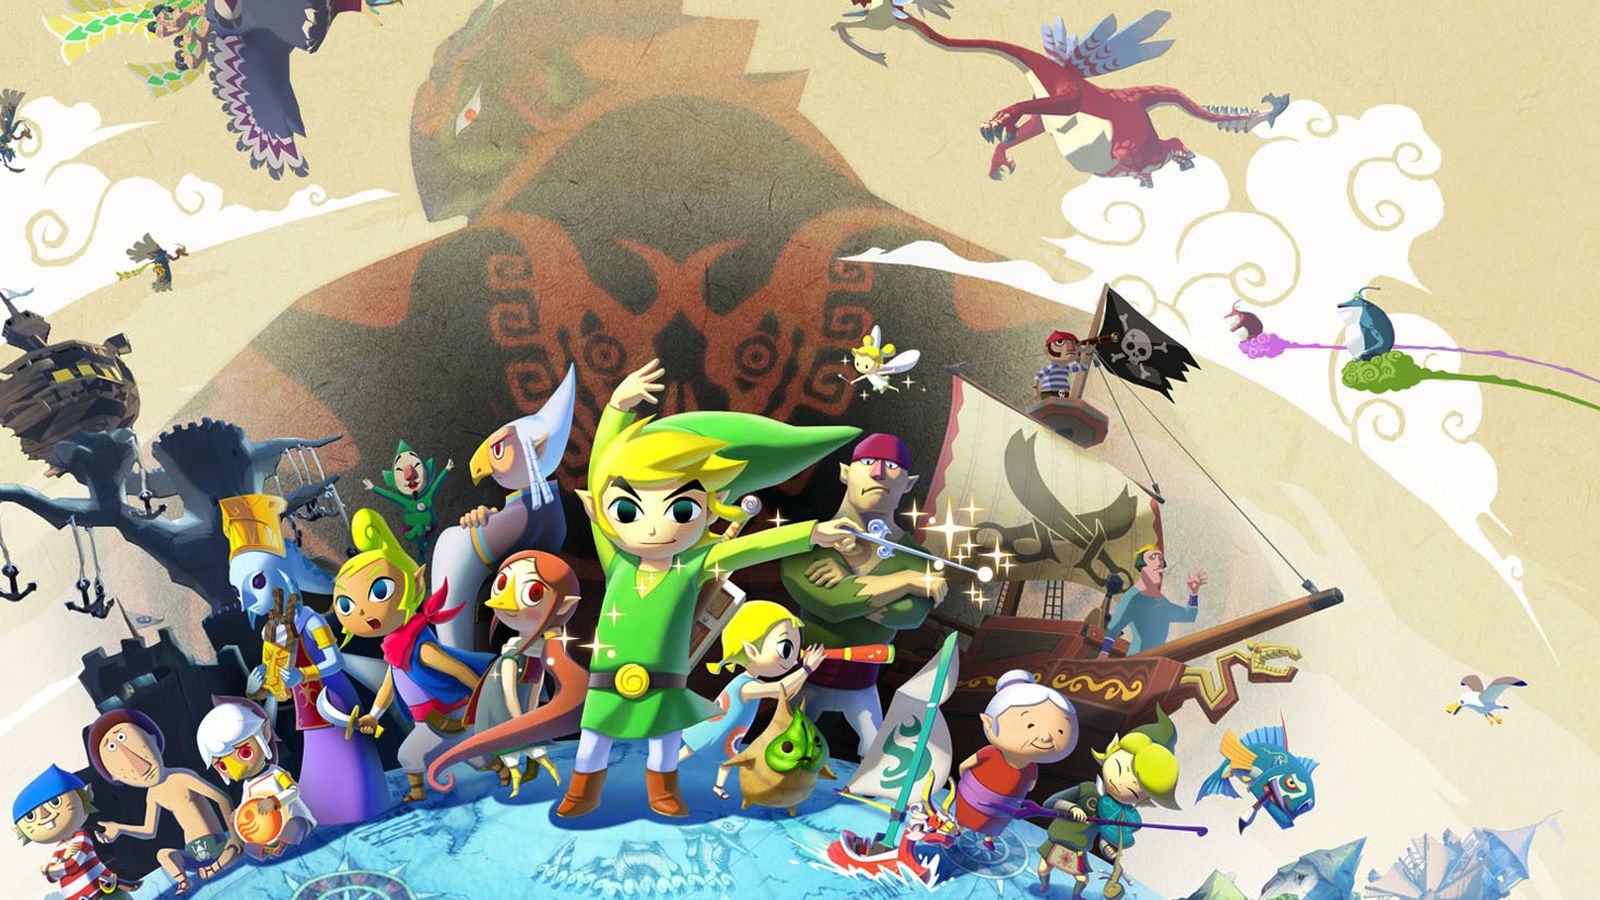 Wind Waker HD launch trailer returns us to a flooded world of sail.